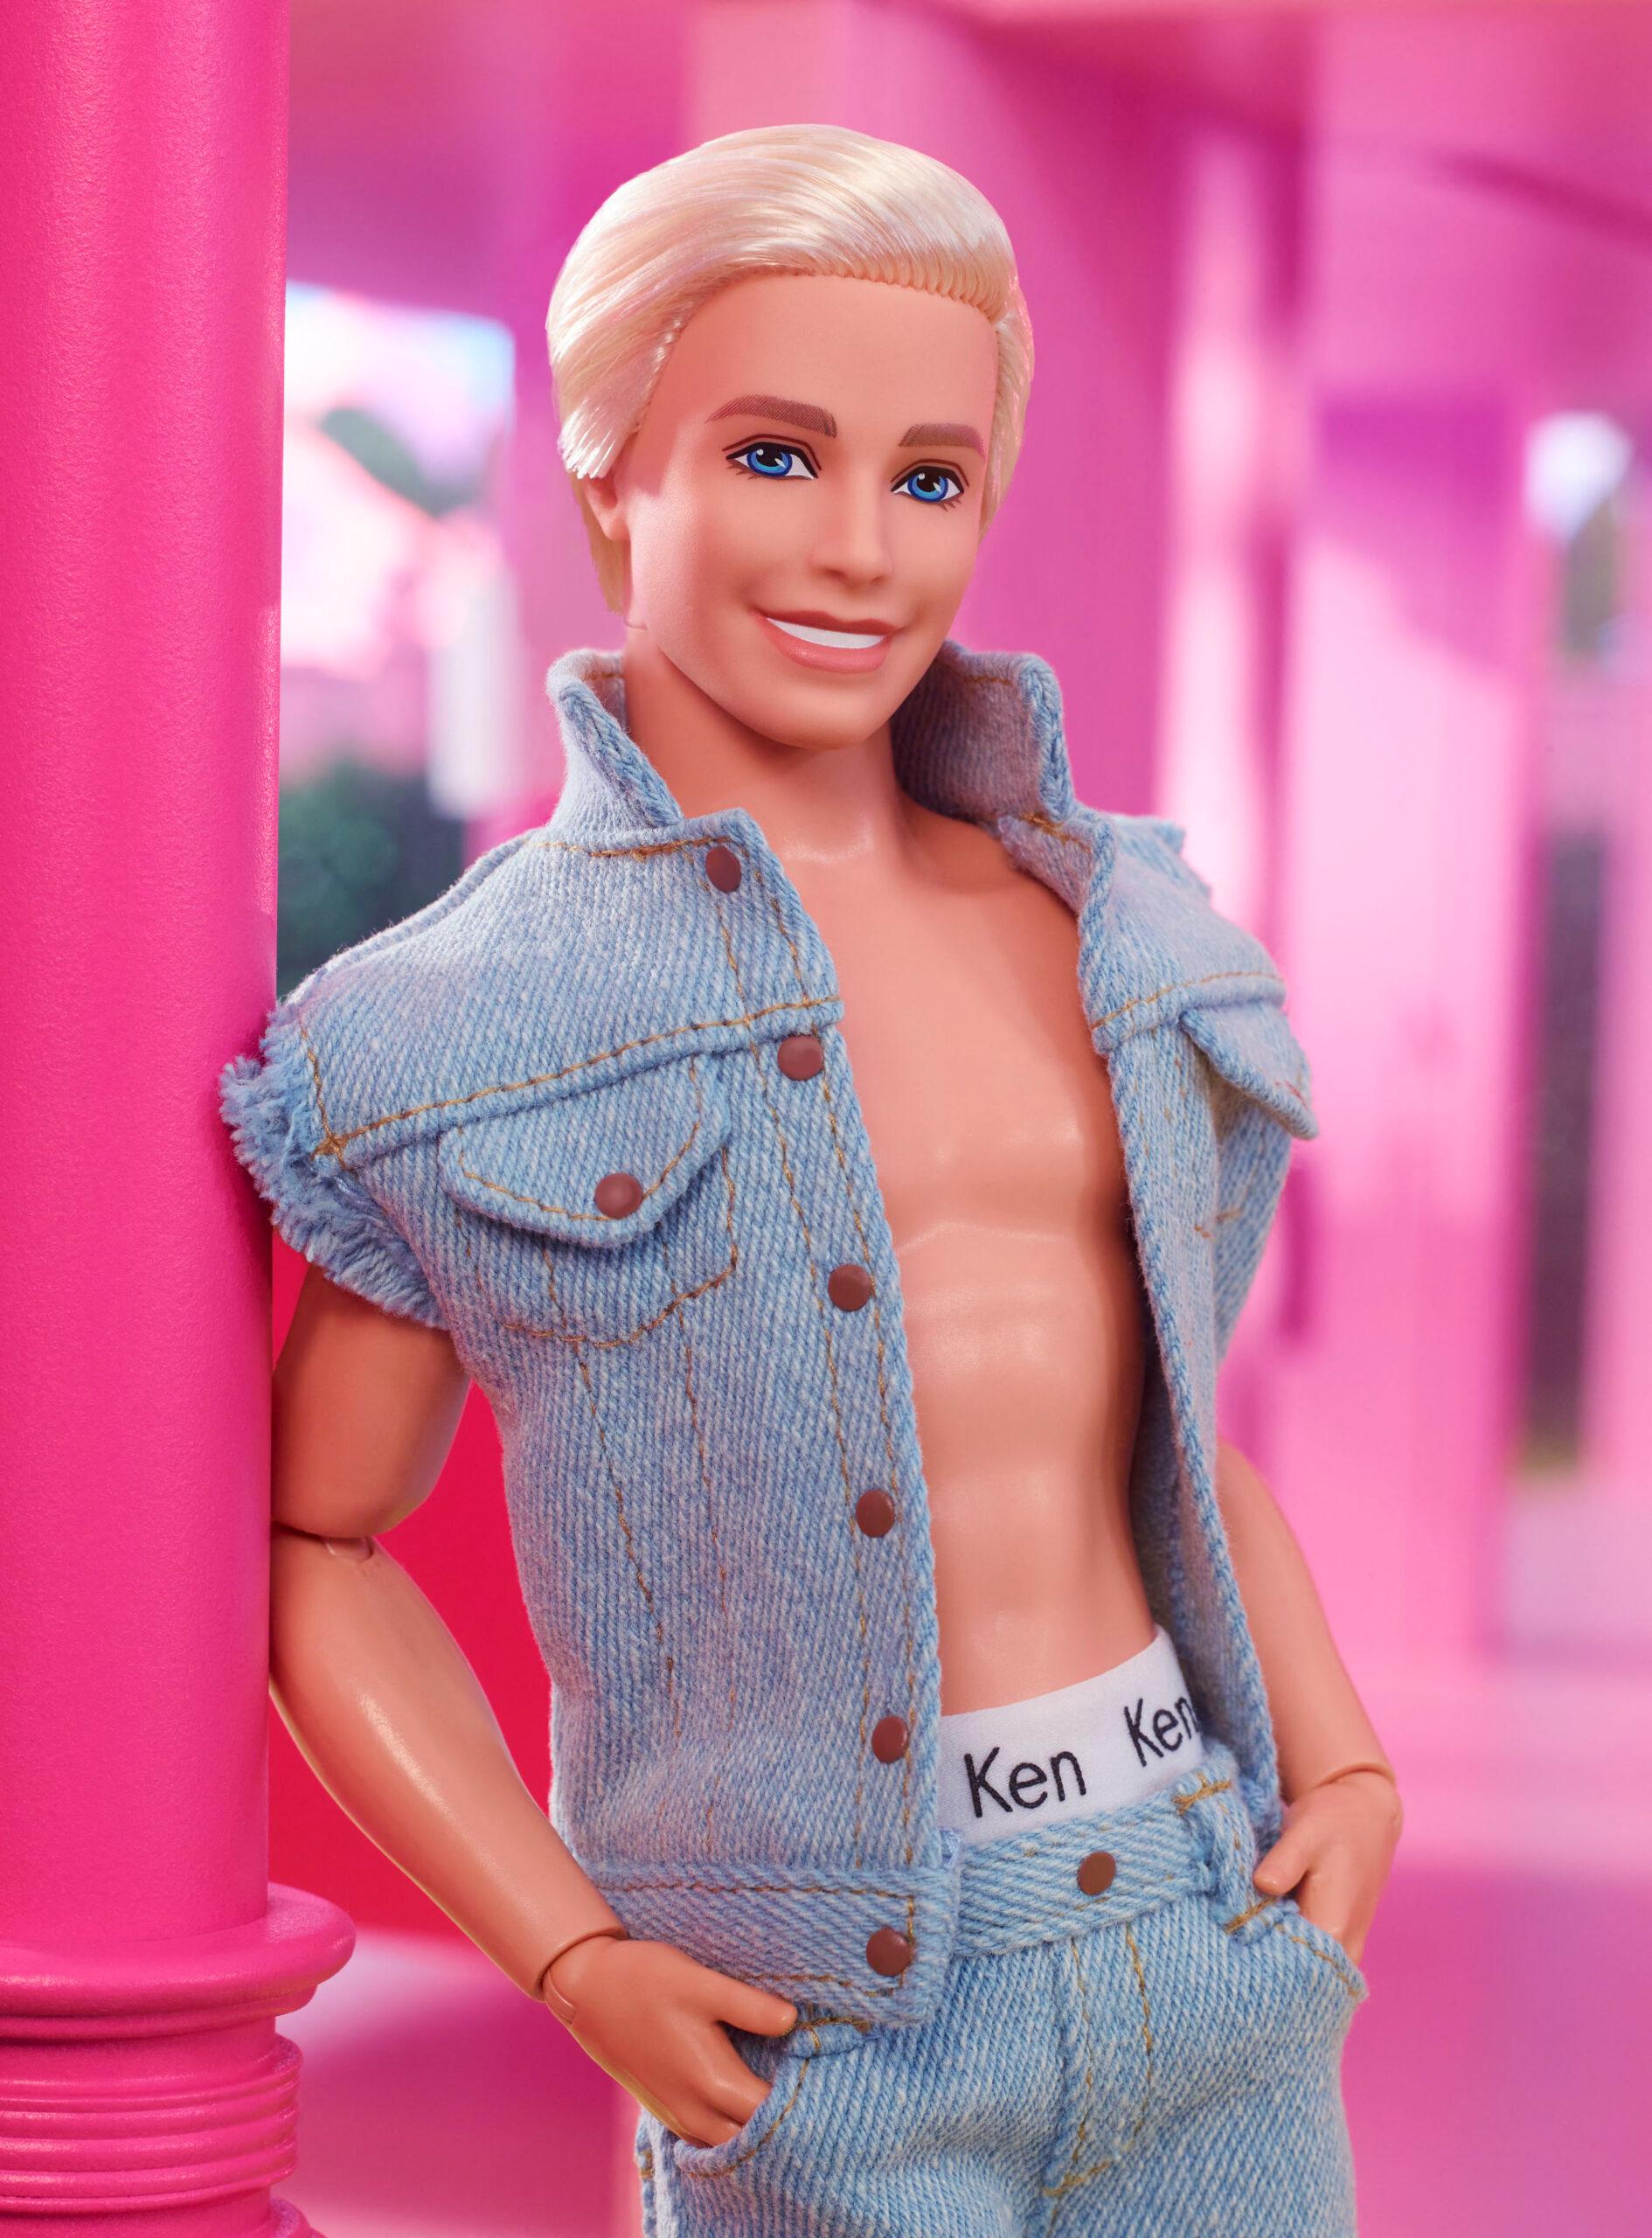 Ryan Gosling Responds To Critics Who Say He's Too Old To Play Ken In New 'Barbie' Movie